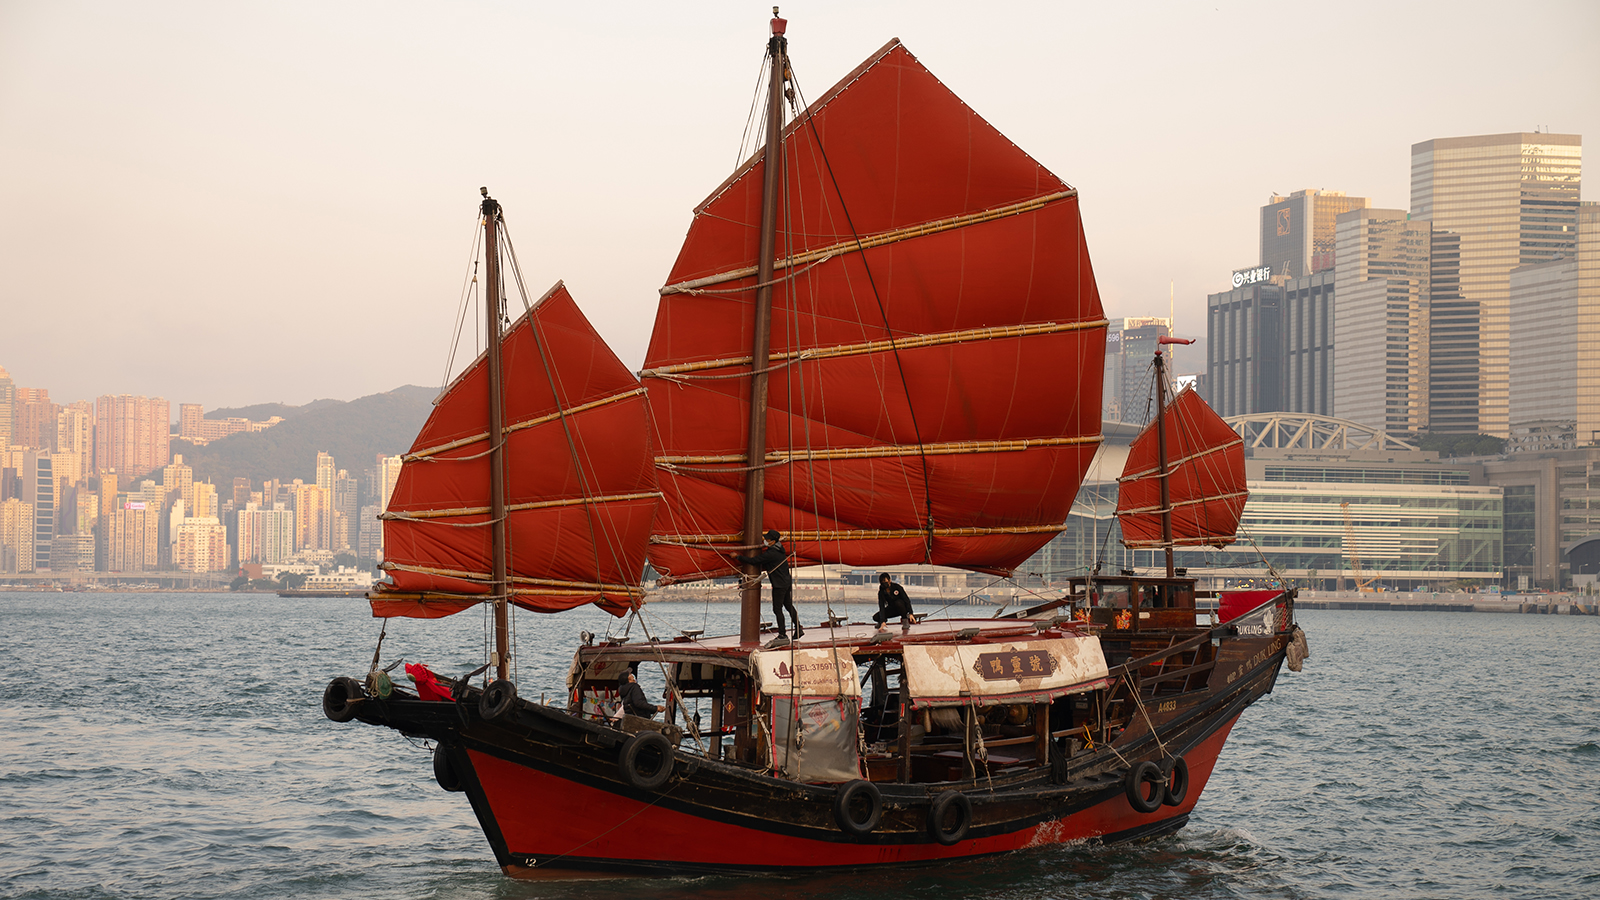 All aboard the Dukling: How the junk boat became a Hong Kong icon | CNN  Travel